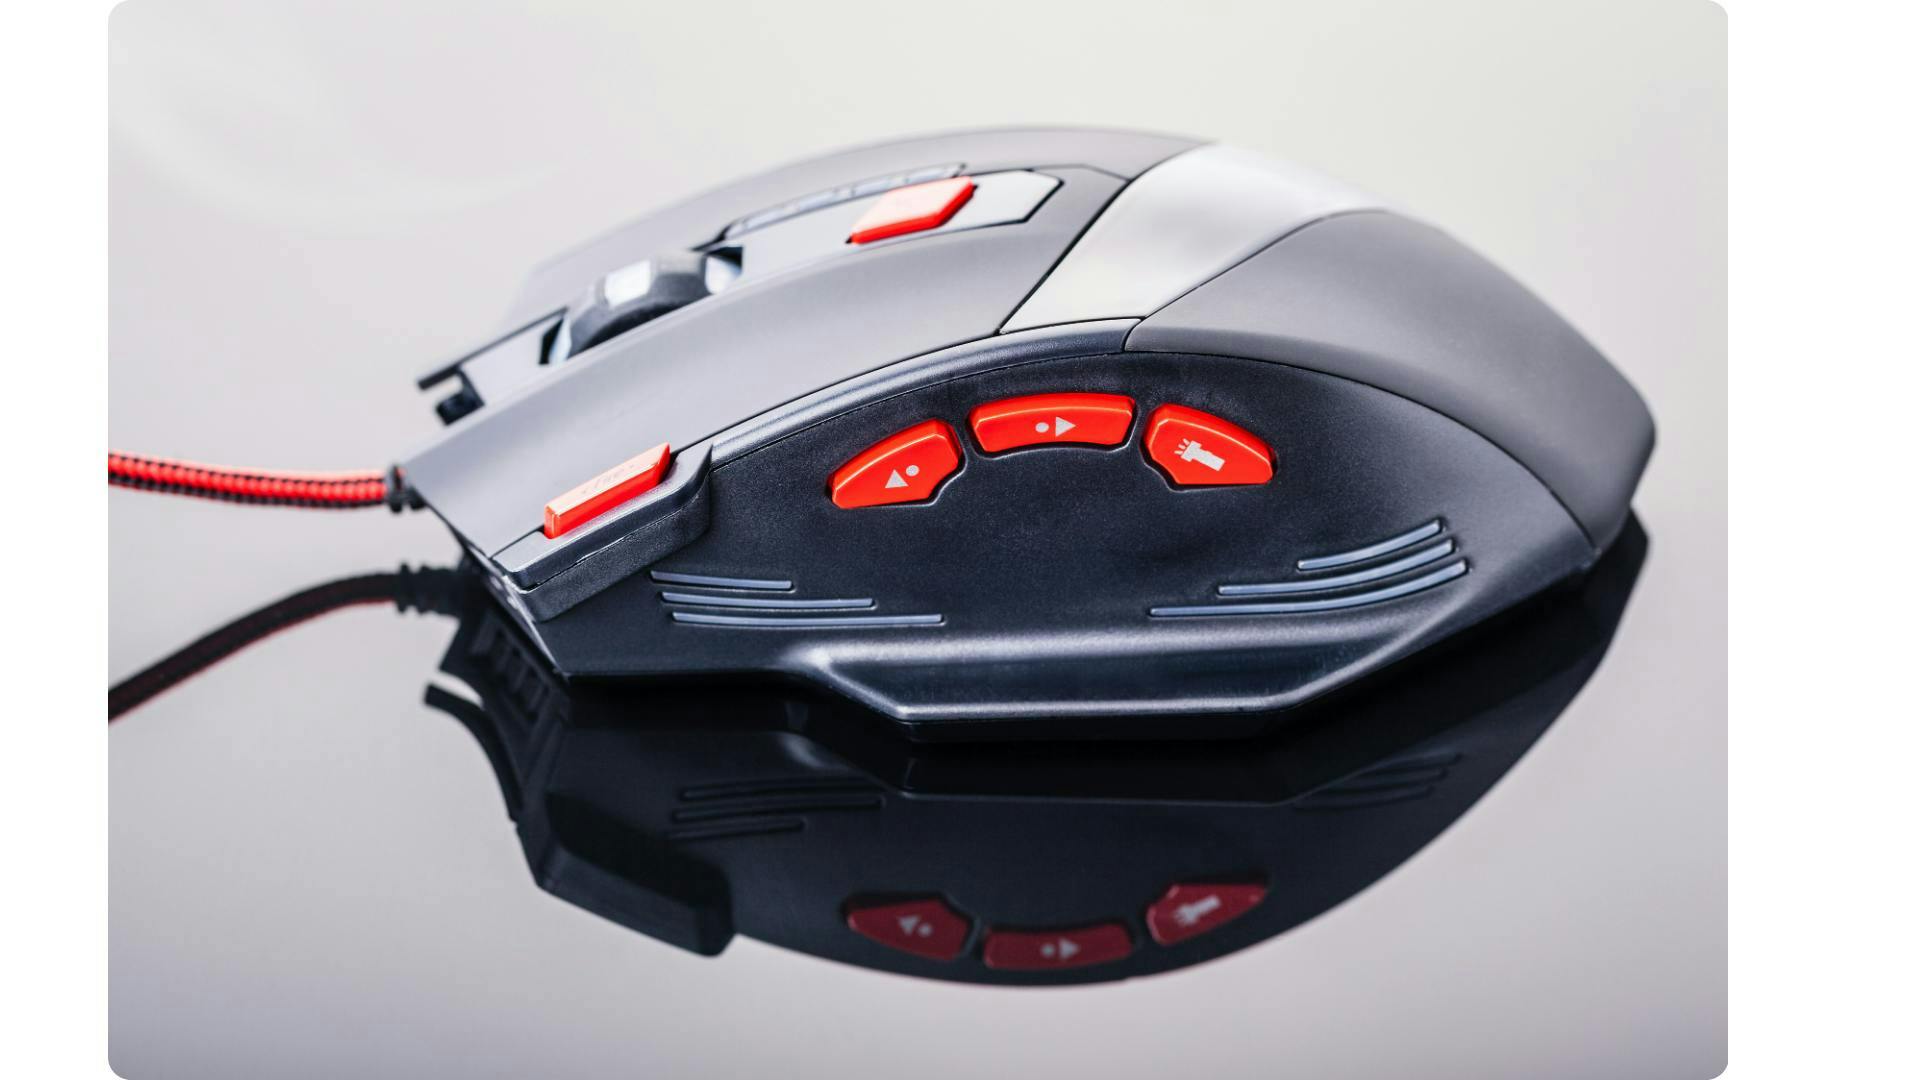 A gaming mouse viewed from the side with multiple additional buttons. | Credit: Canva.